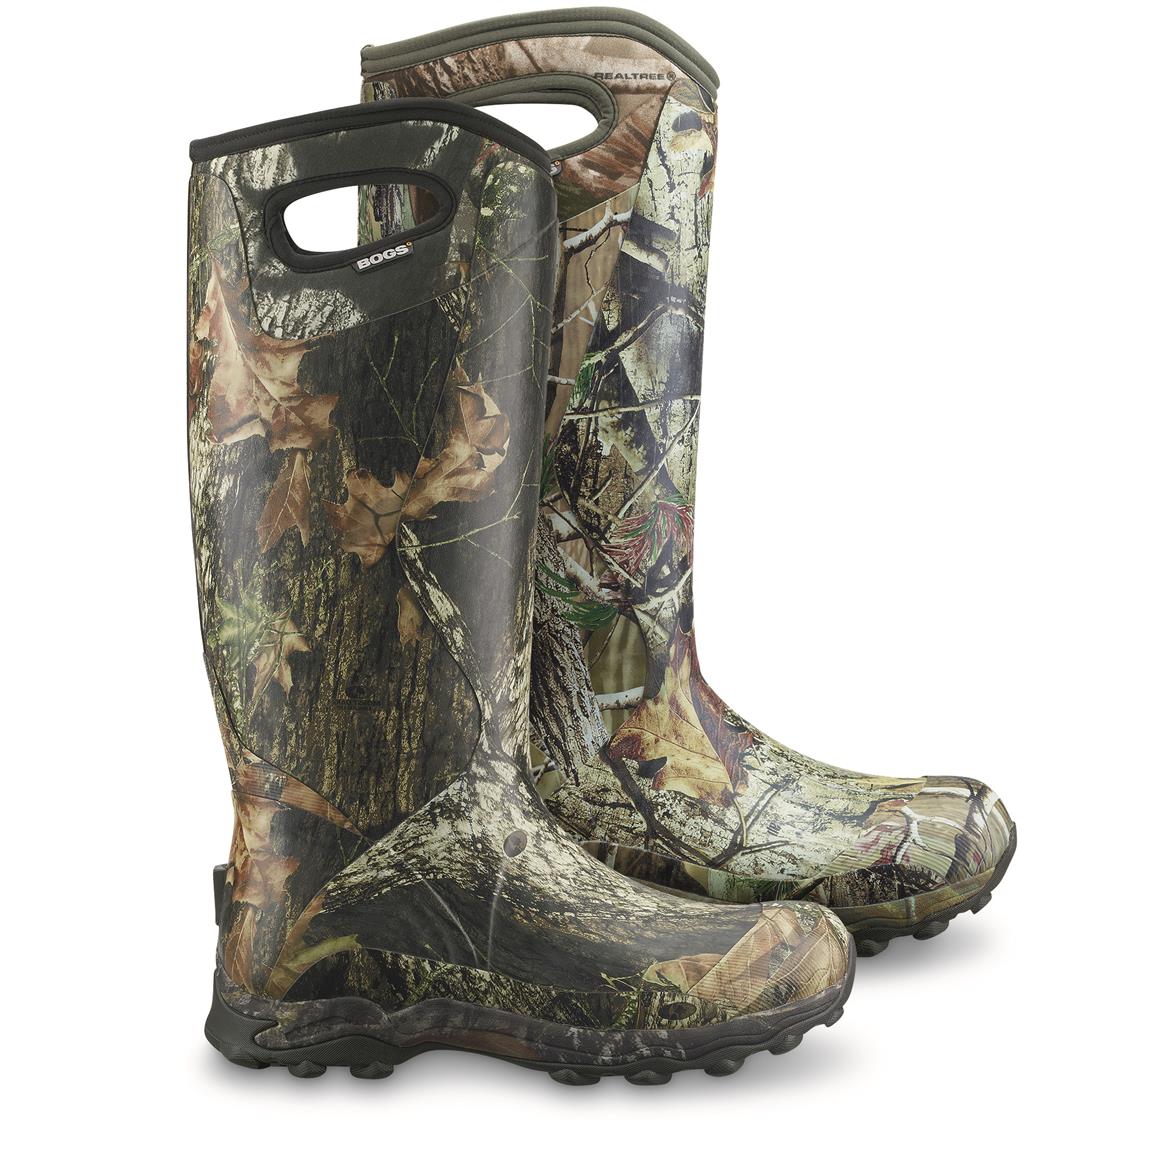 Bowman Rubber Hunting Boots, Waterproof 